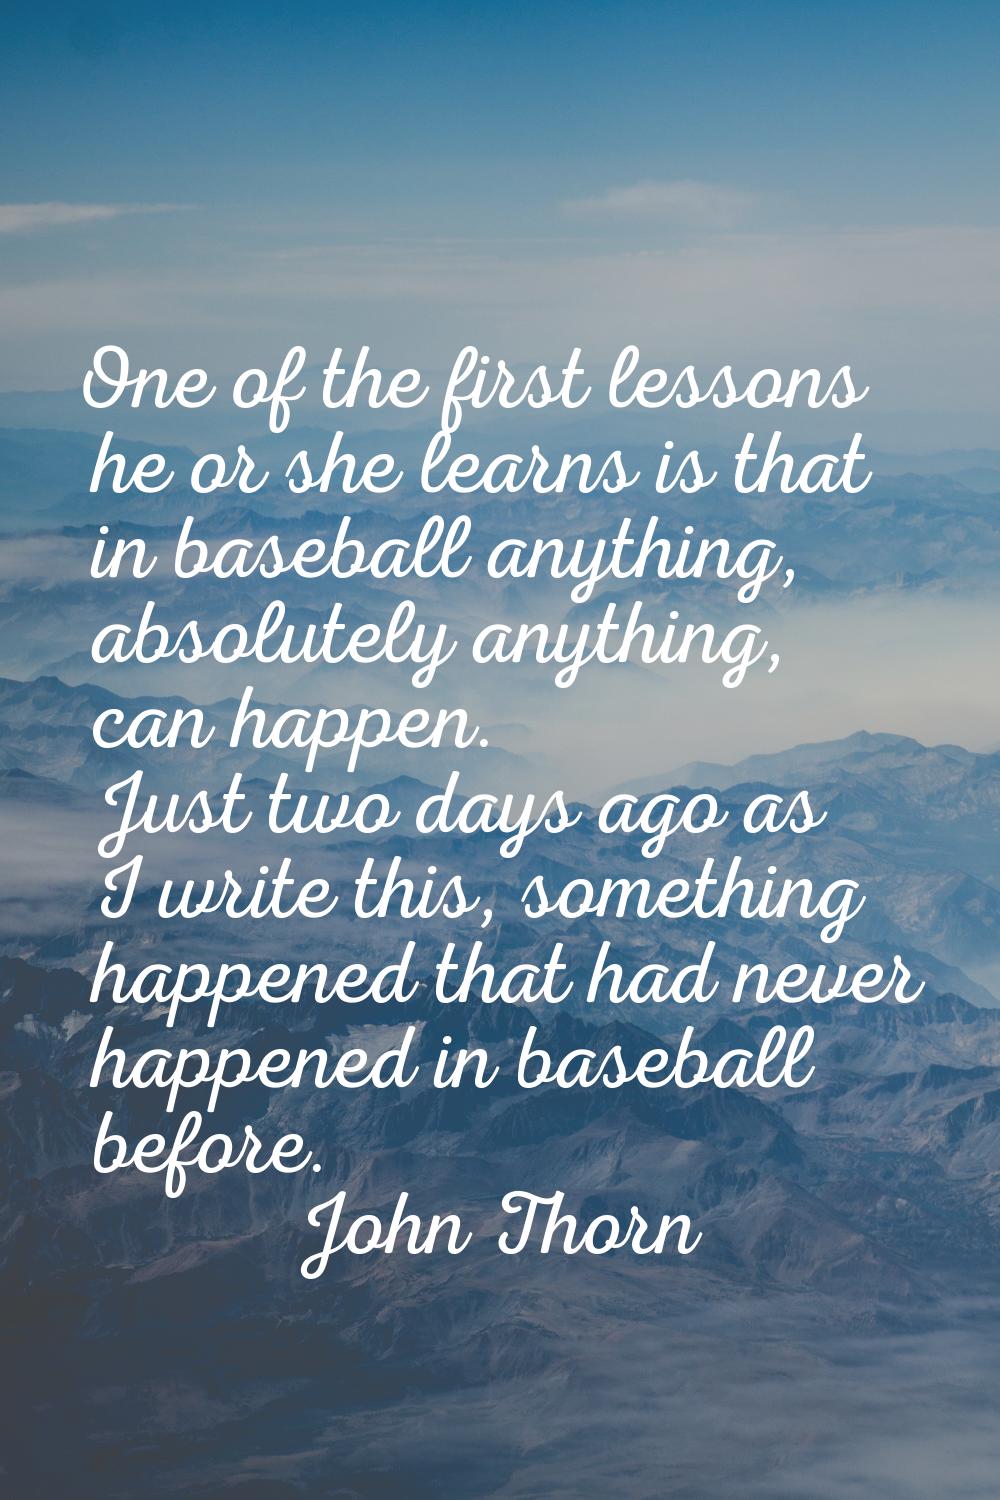 One of the first lessons he or she learns is that in baseball anything, absolutely anything, can ha